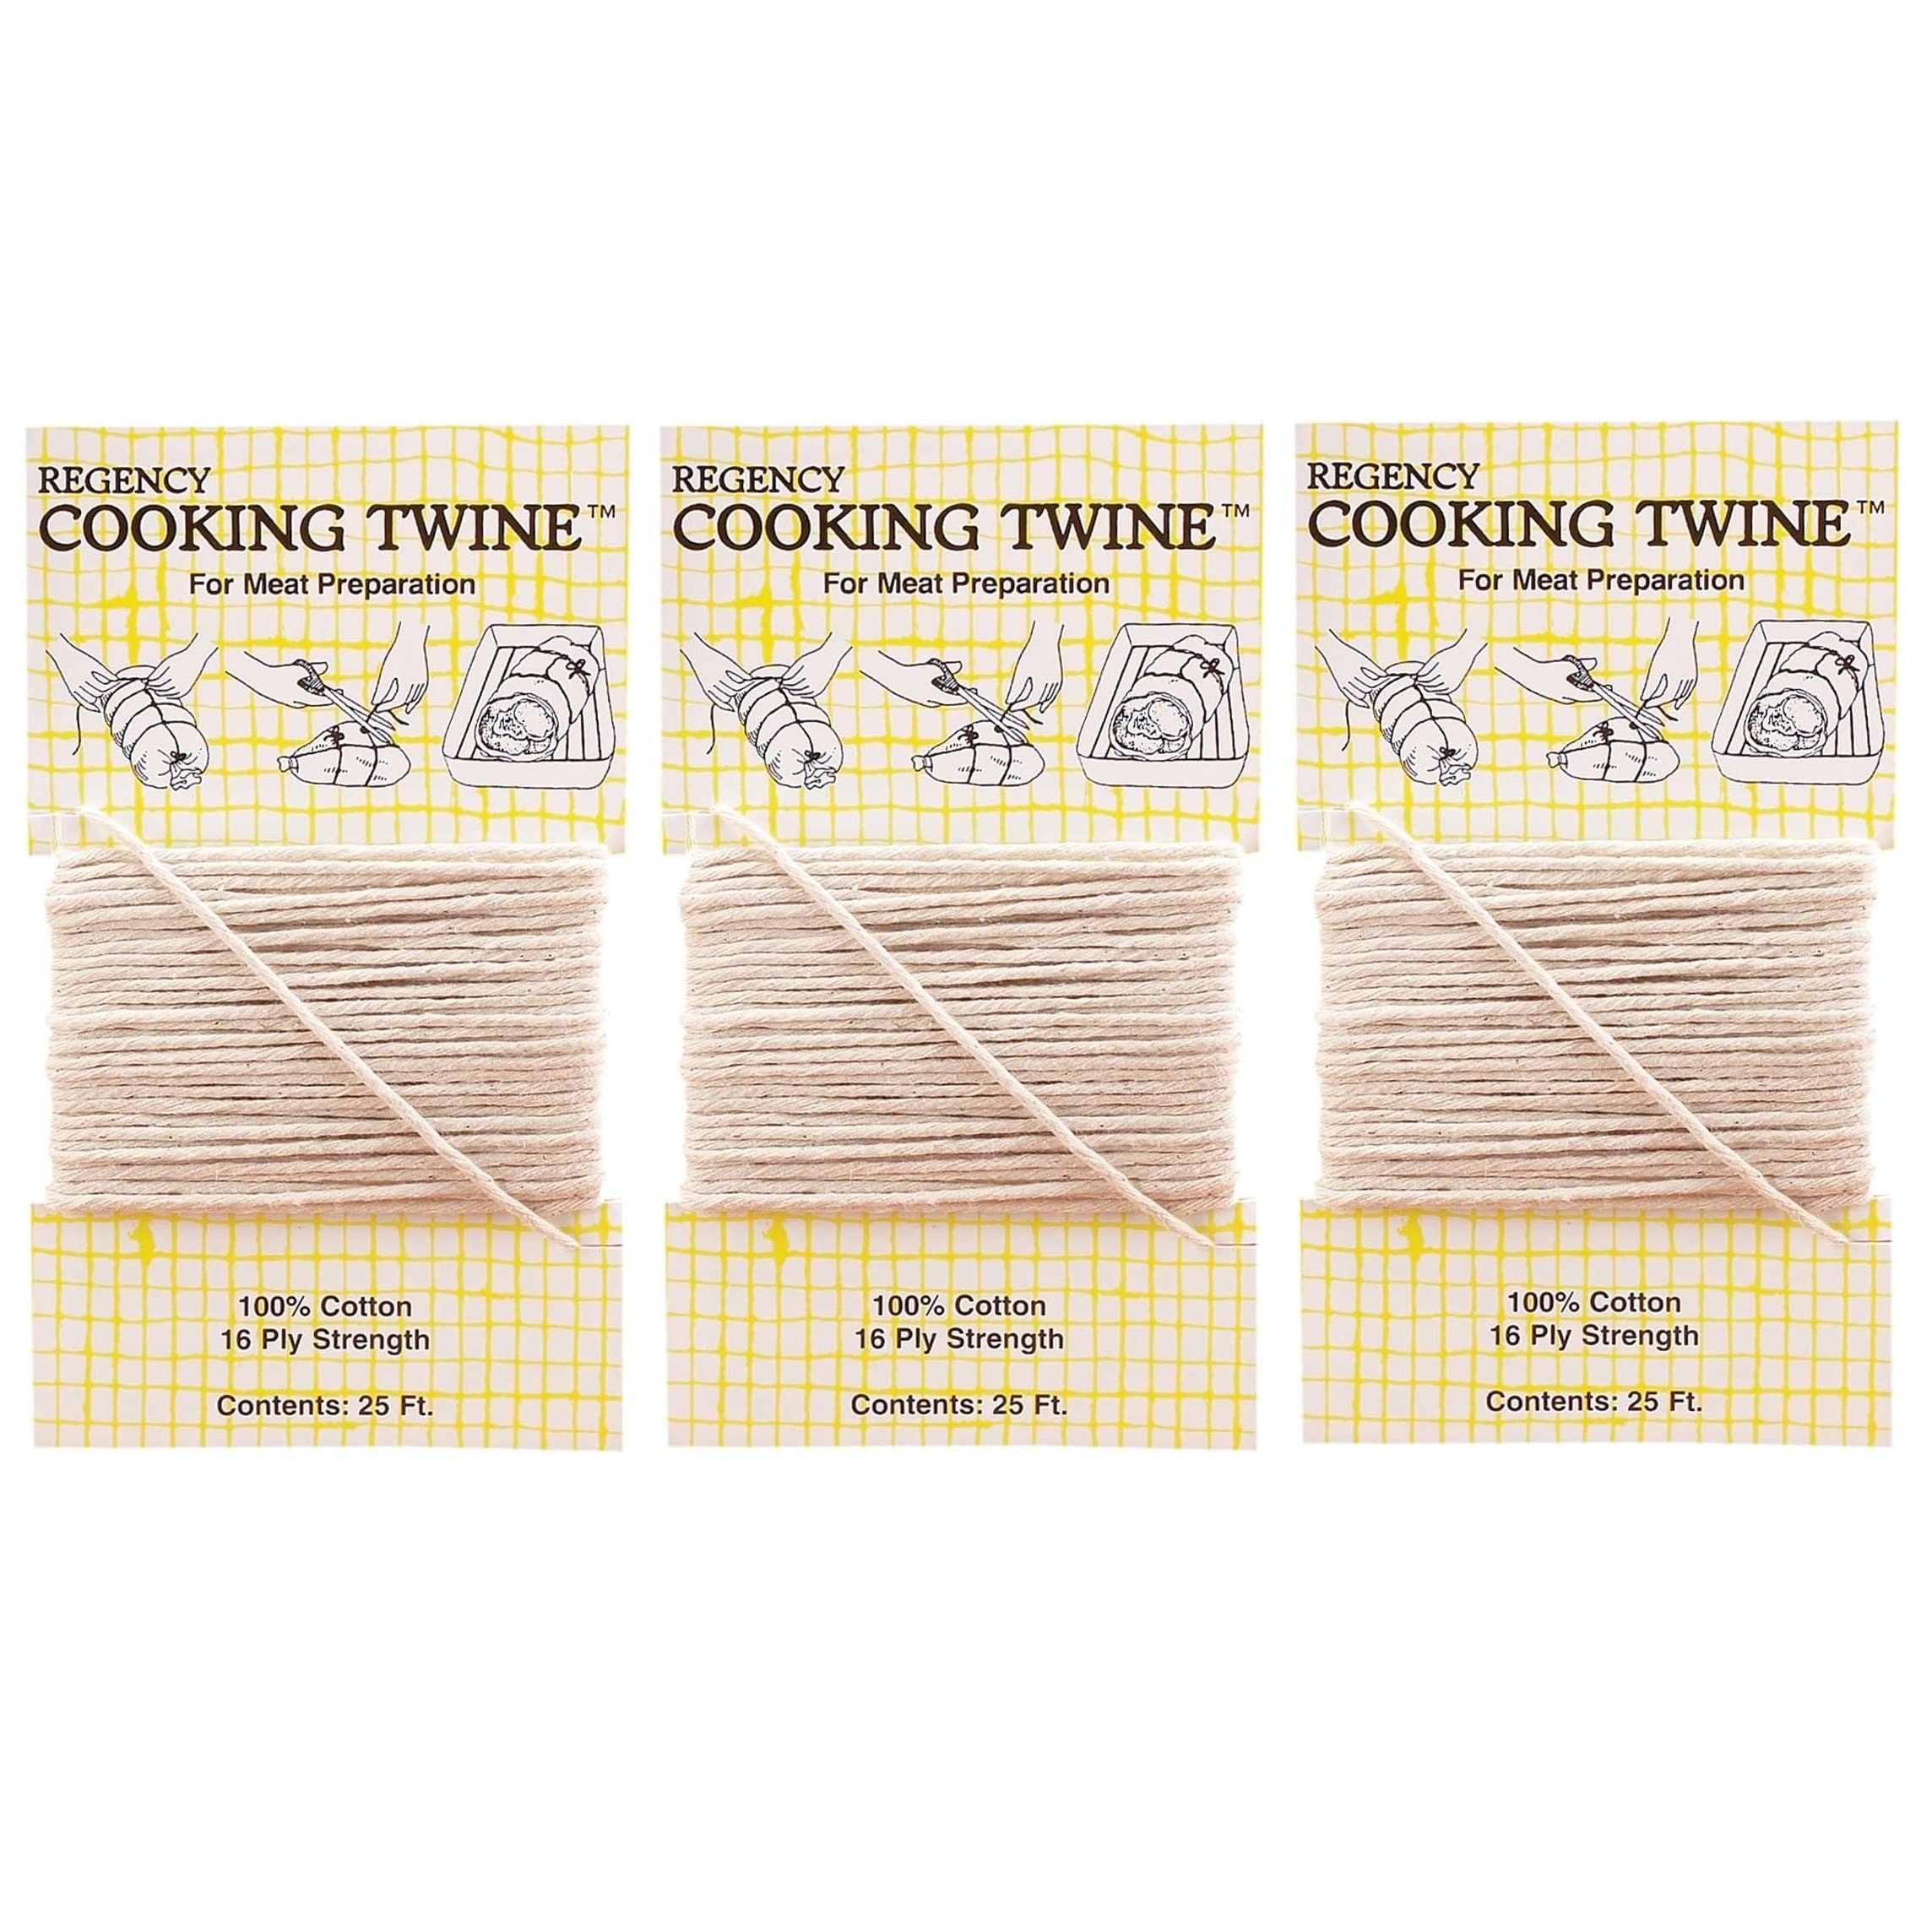 Regency 100% Cotton 25' Cooking Twine - Meat Poultry Preparation